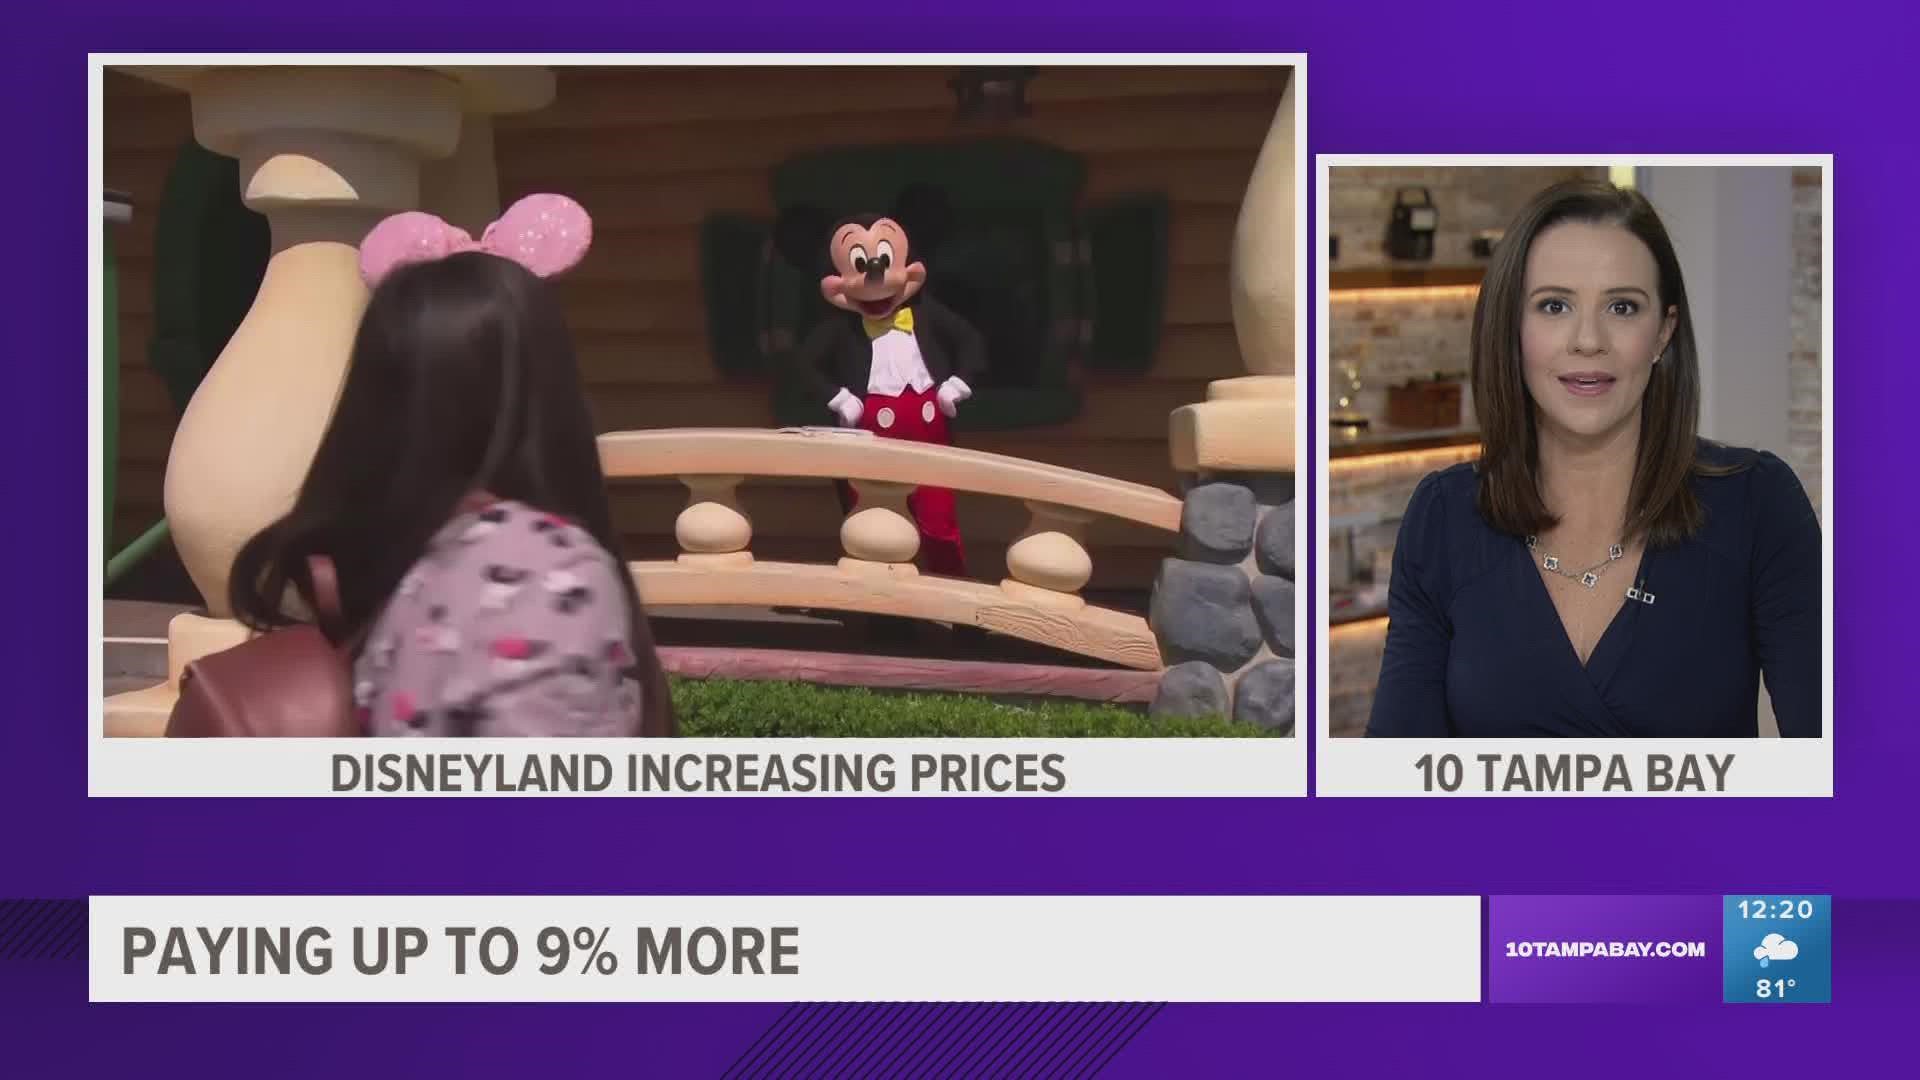 The happiest place on earth is raising its prices.